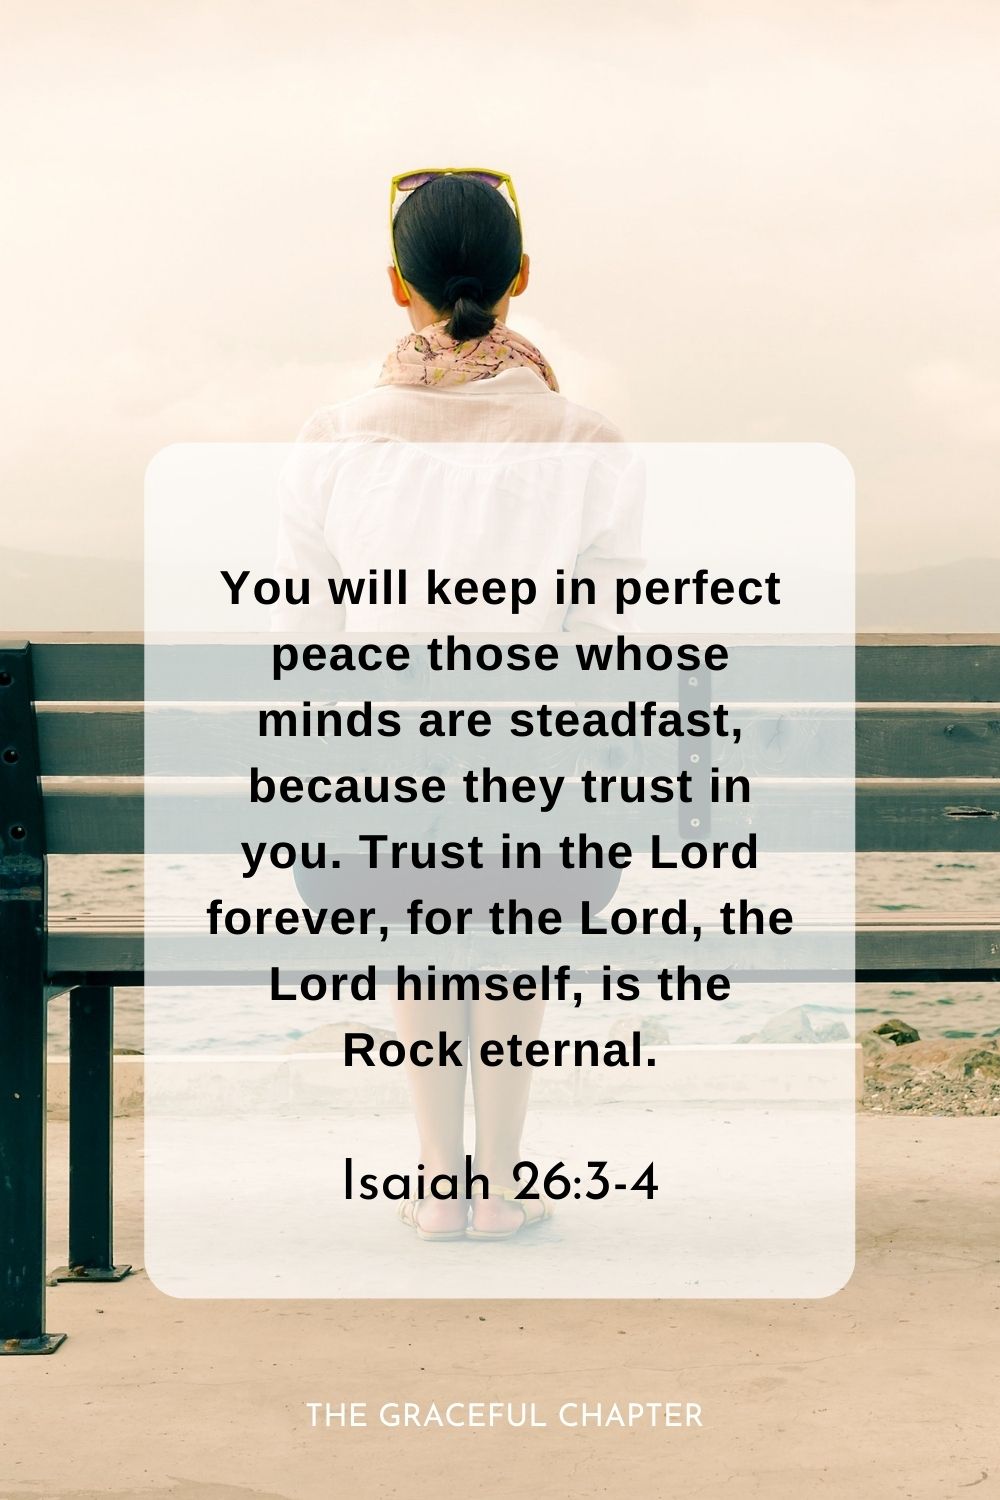 You will keep in perfect peace those whose minds are steadfast, because they trust in you. Trust in the Lord forever, for the Lord, the Lord himself, is the Rock eternal. bible verses about trusting God